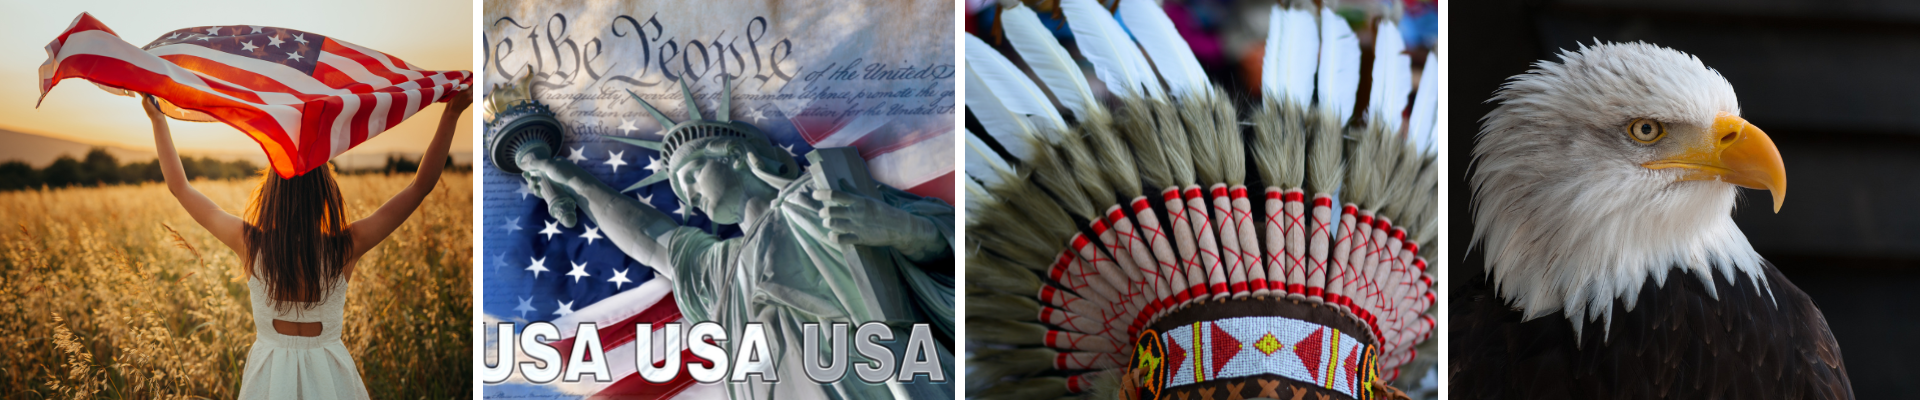 American images banner